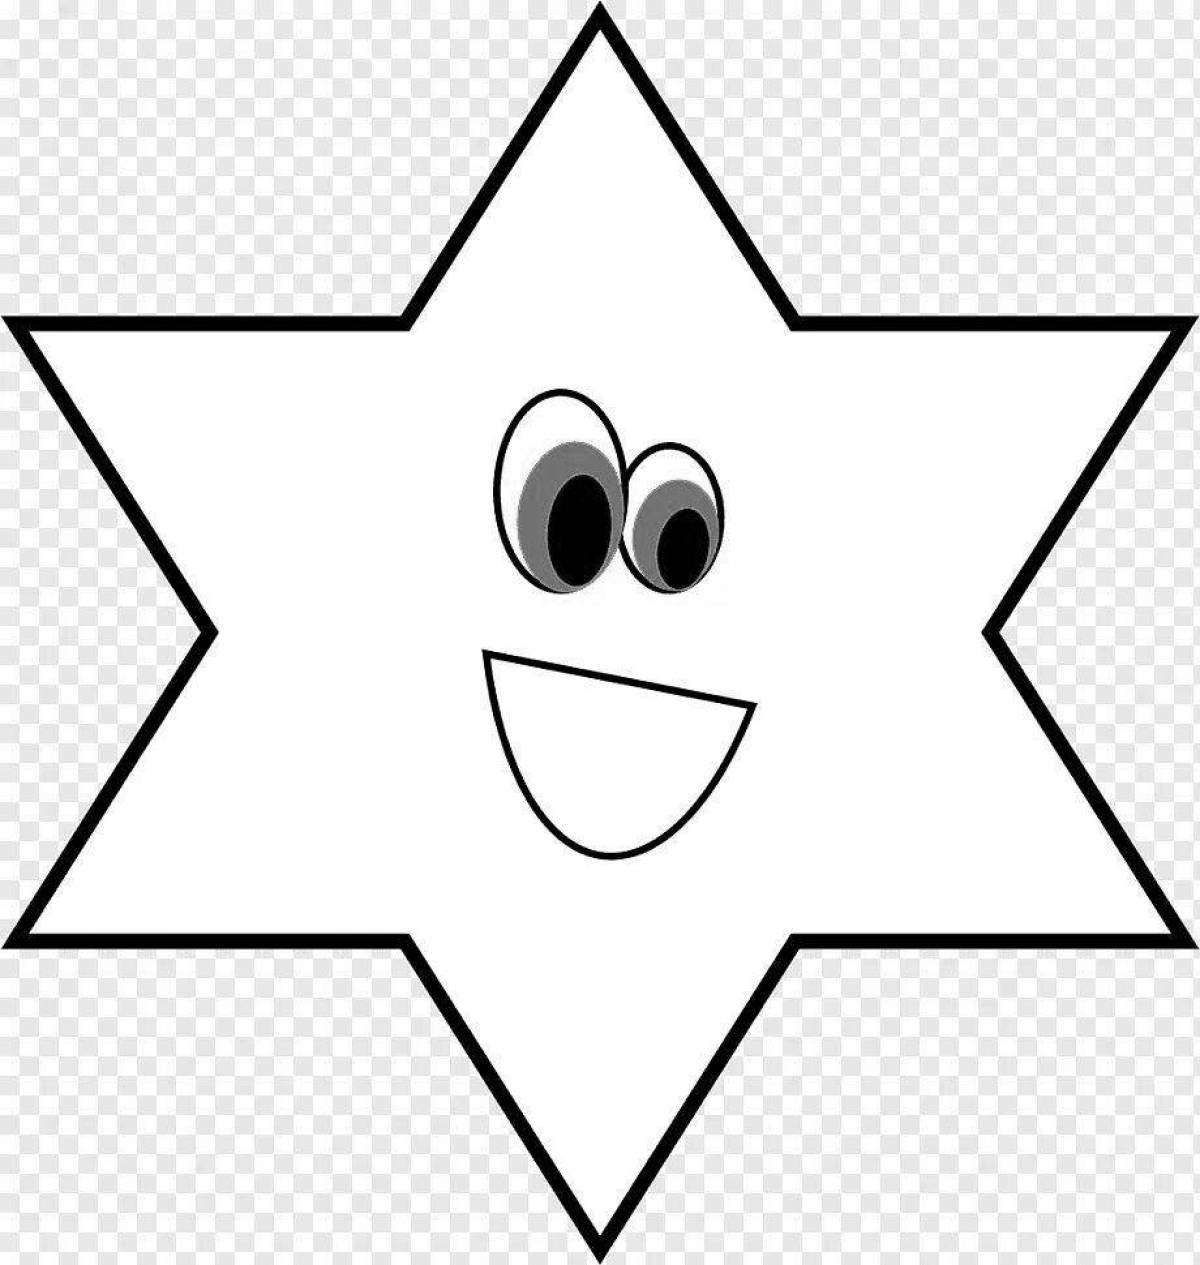 Coloring book shining six-pointed star